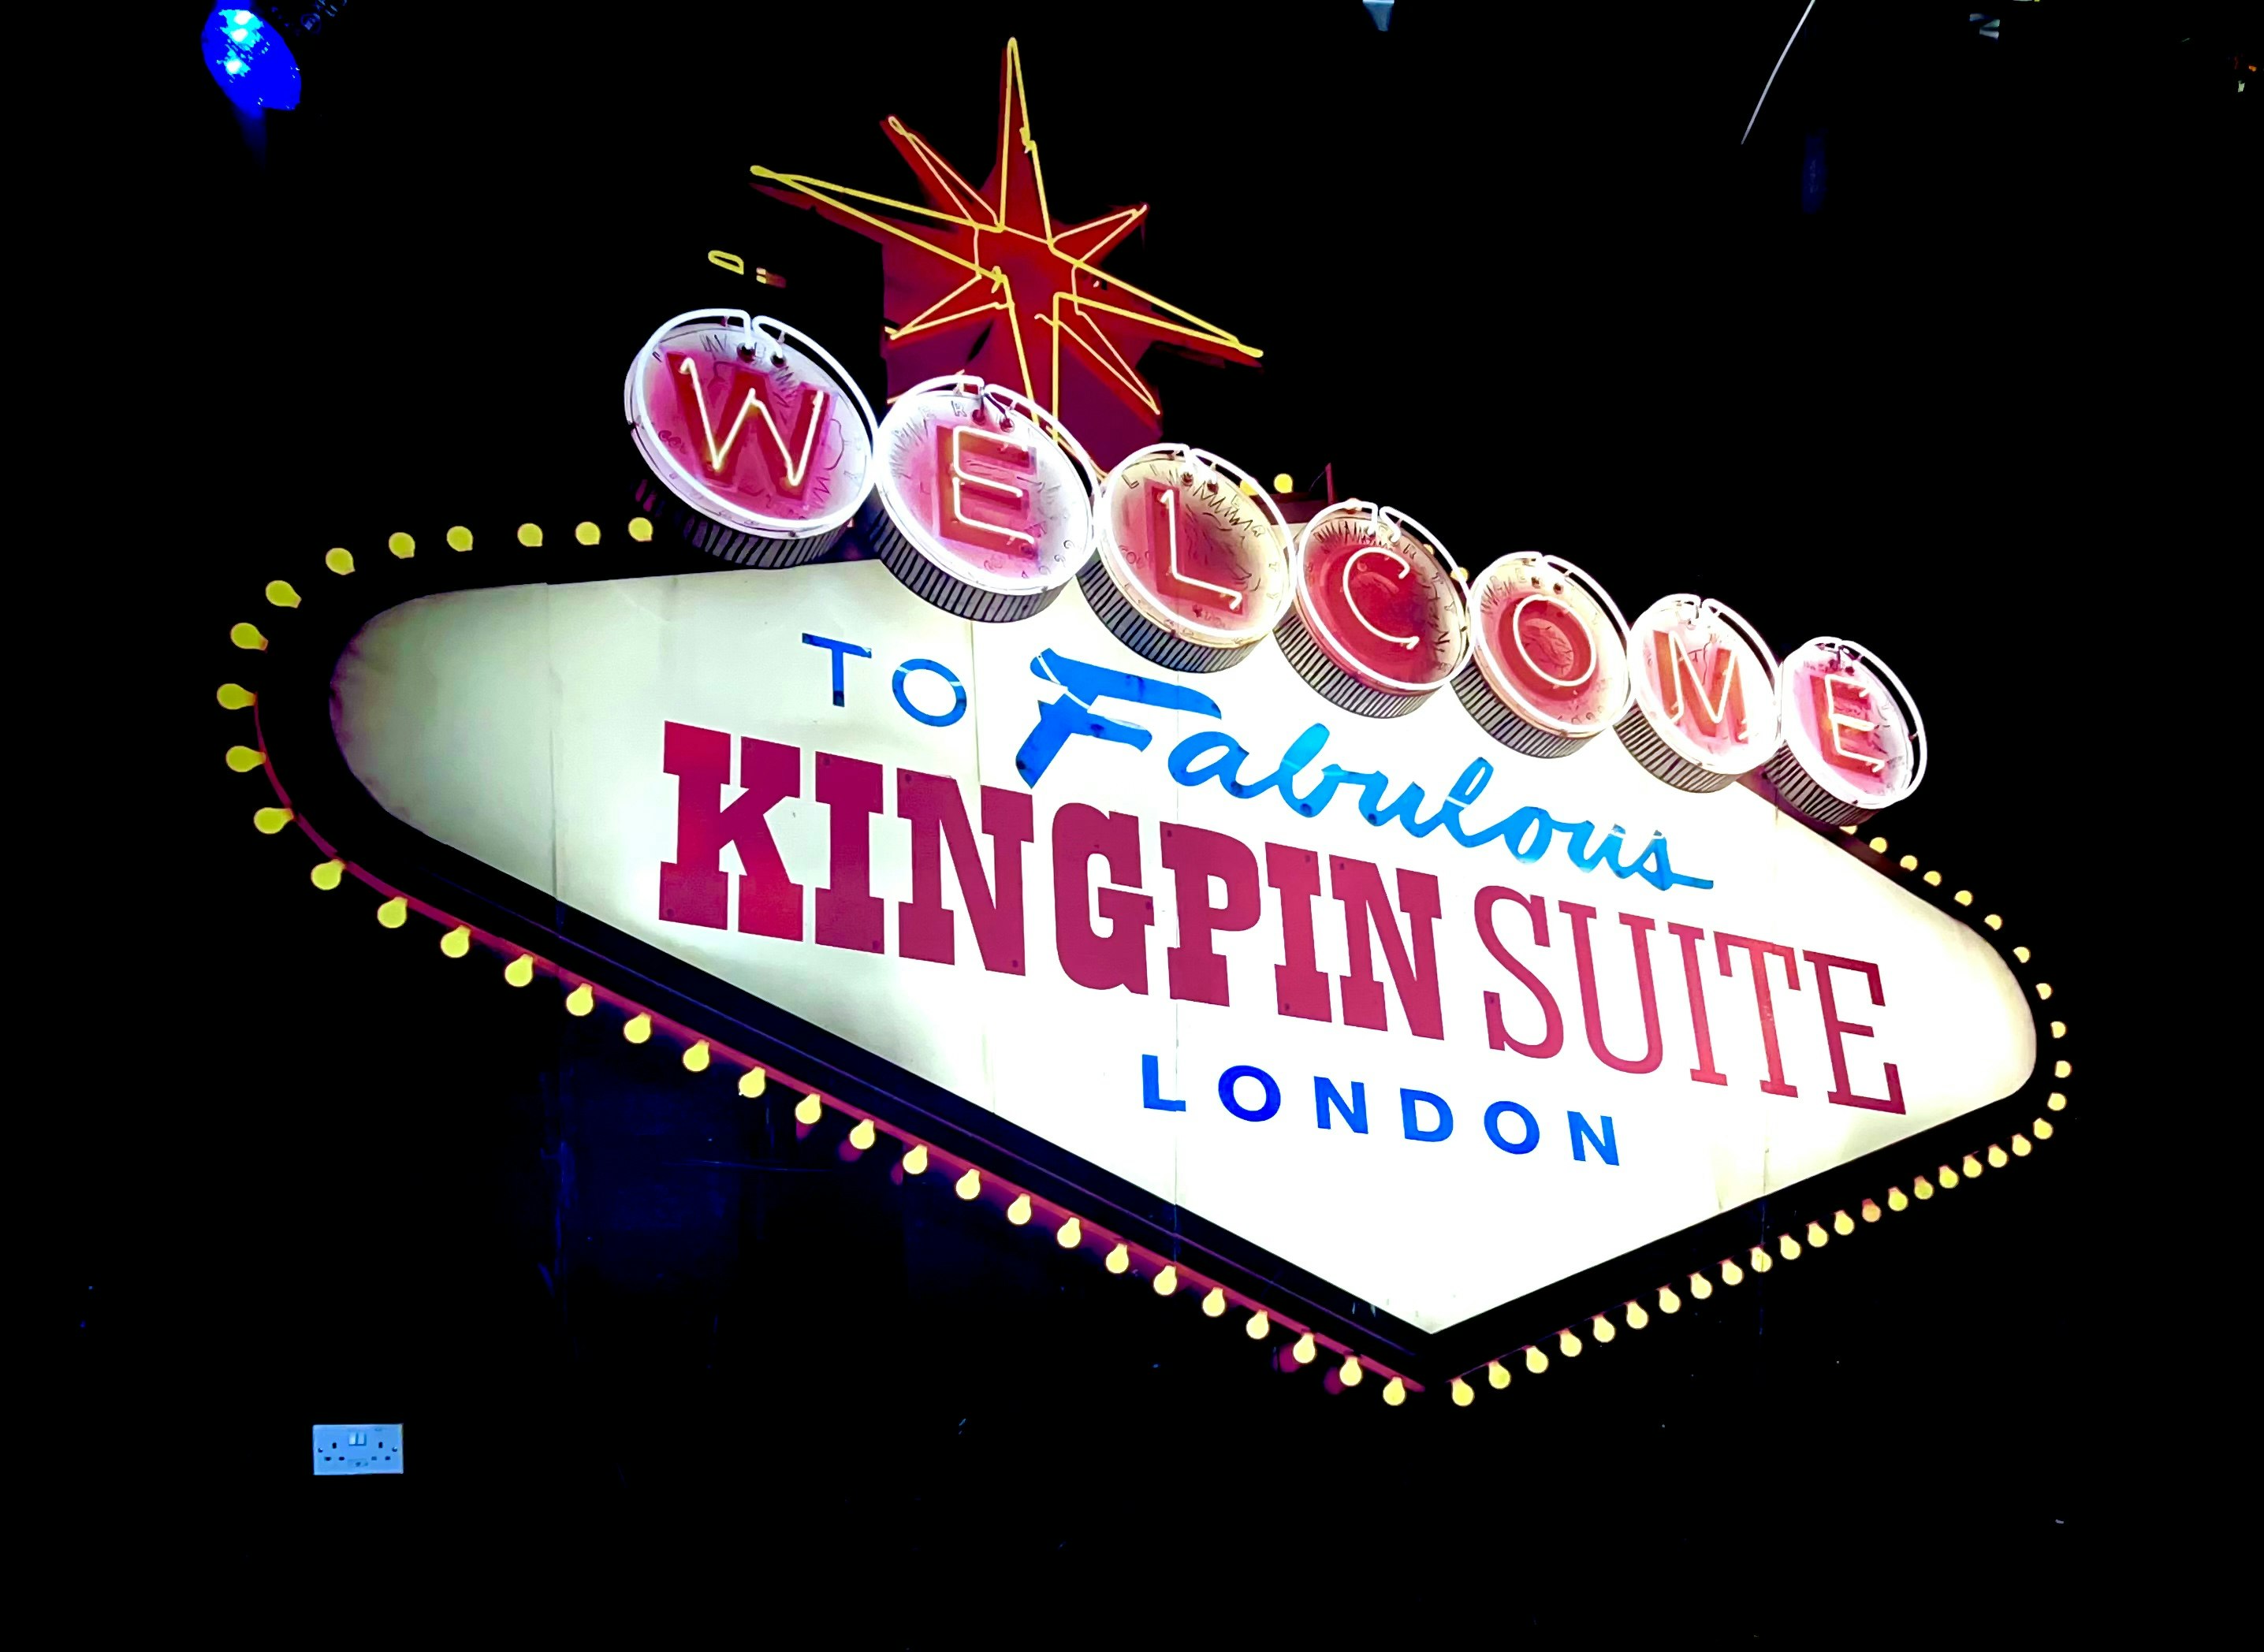 Bloomsbury Bowling Lanes & The Kingpin Suite - The KingPin Suite image 1